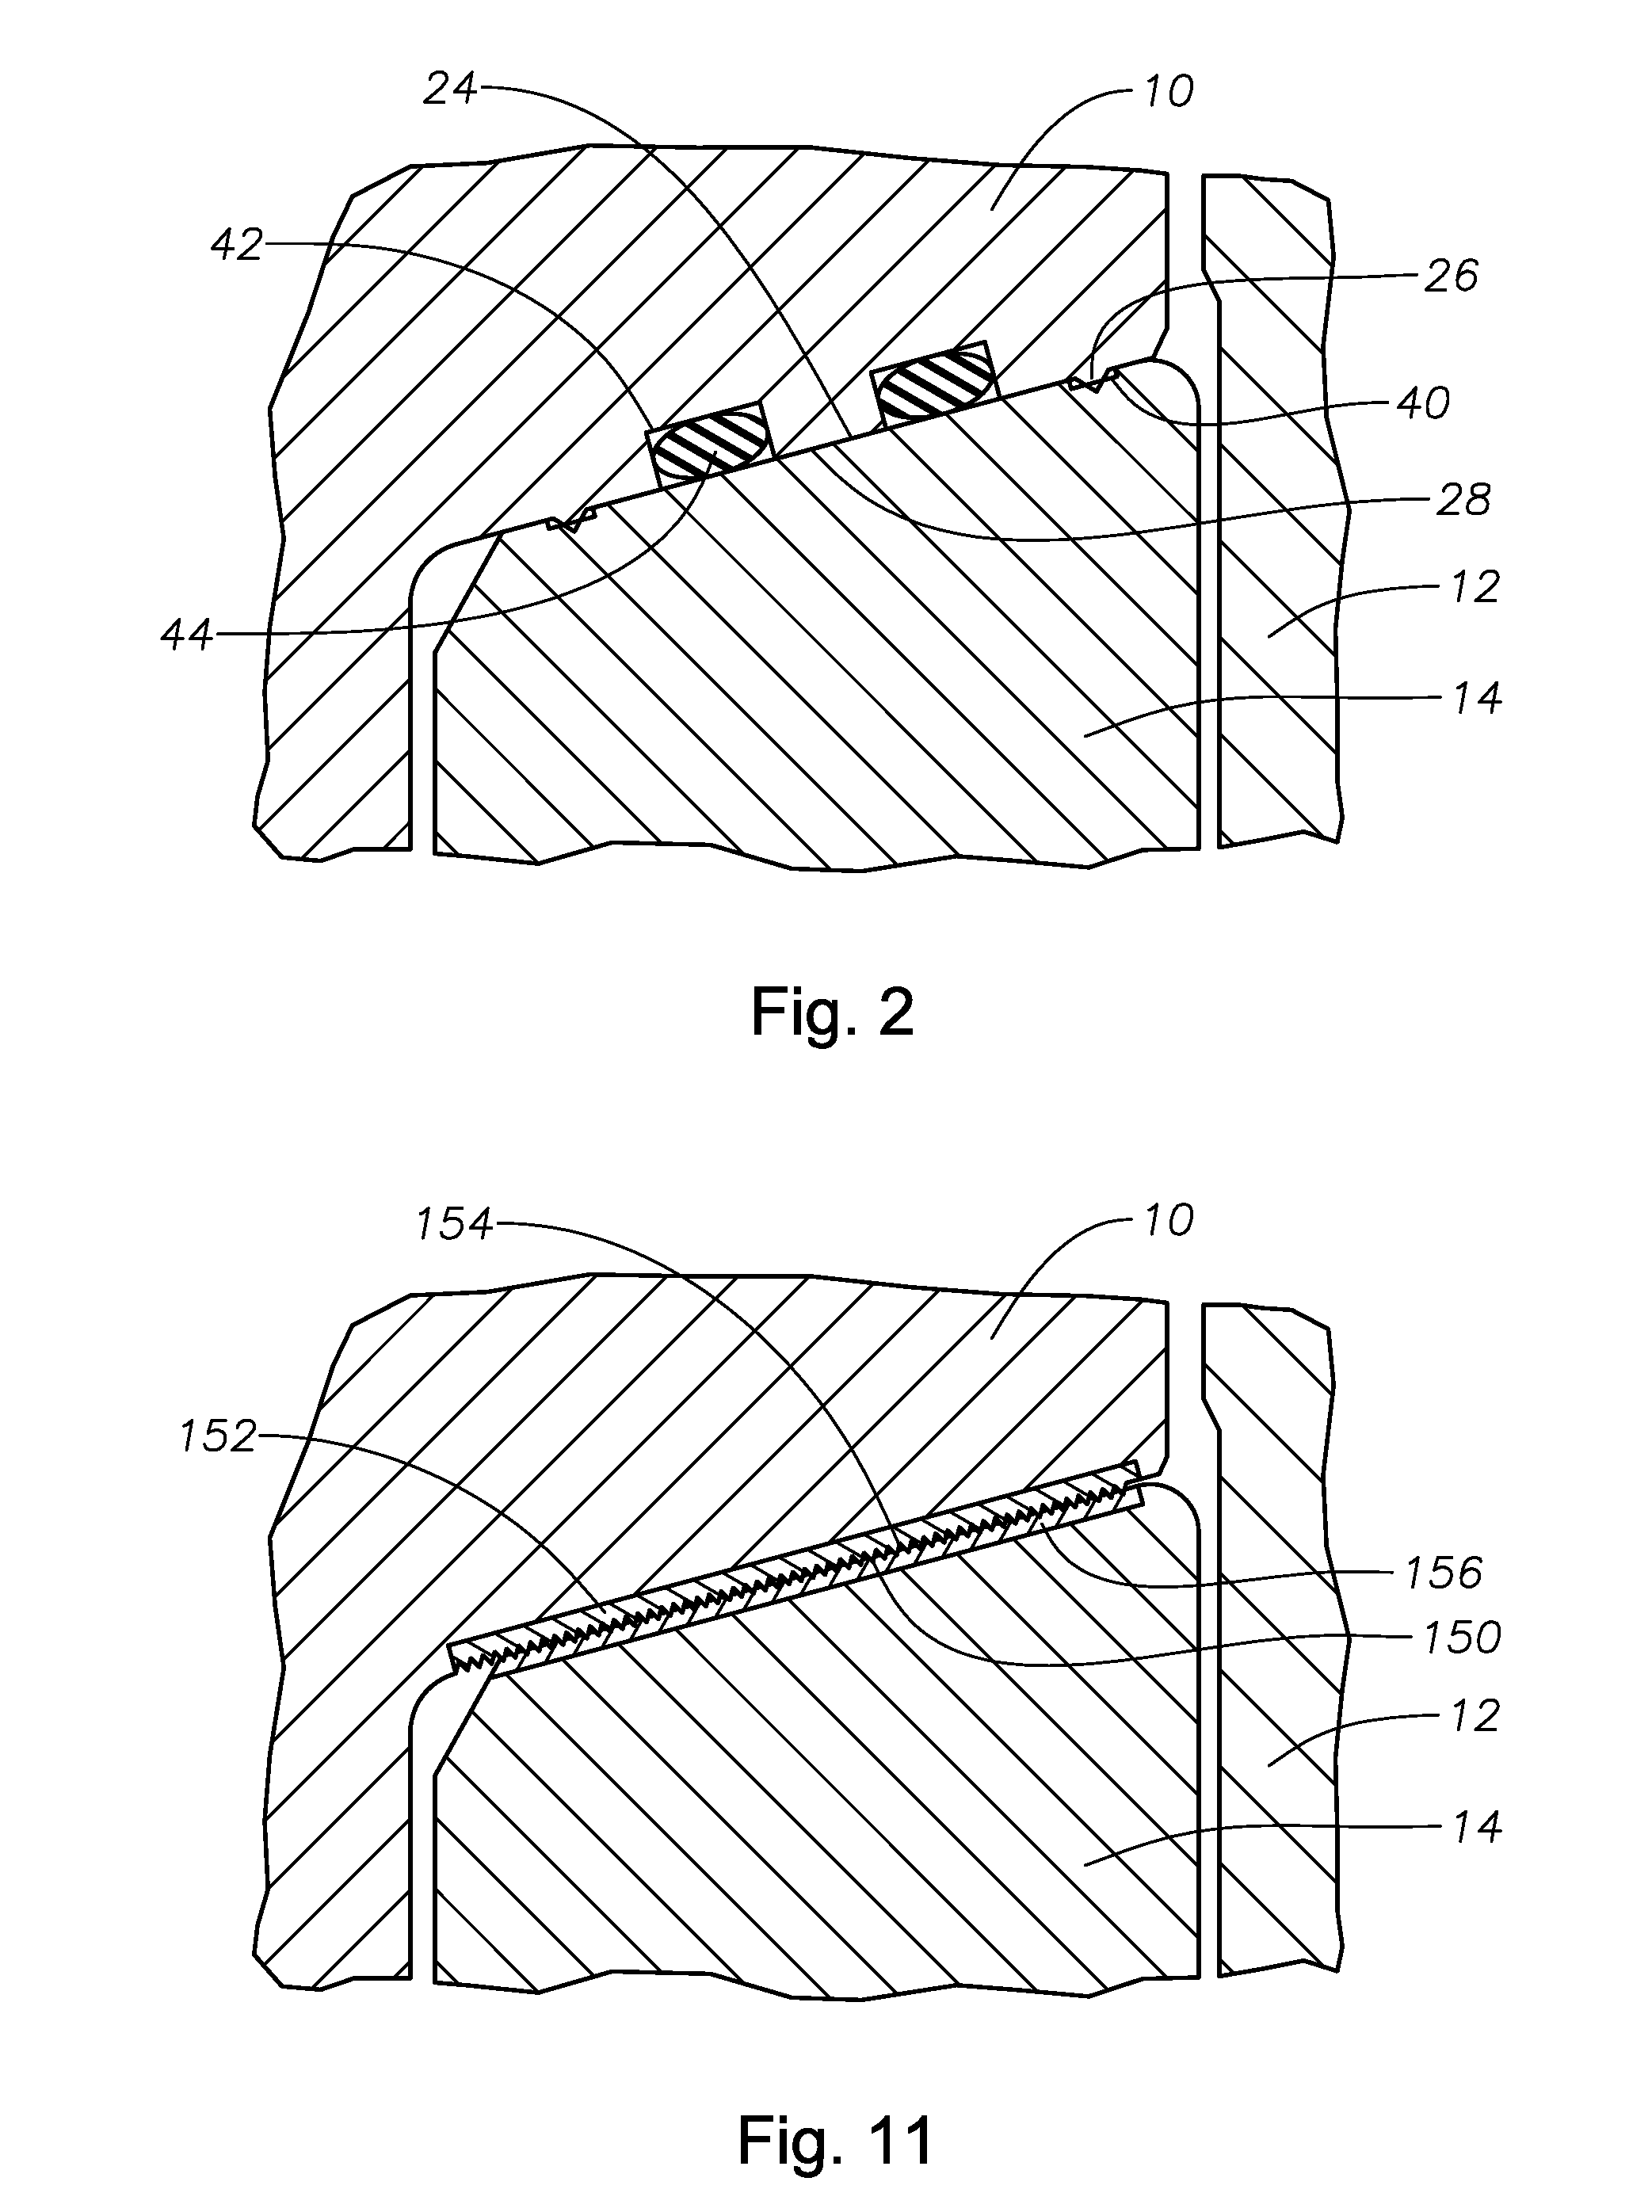 Wicker-Type Face Seal and Wellhead System Incorporating Same